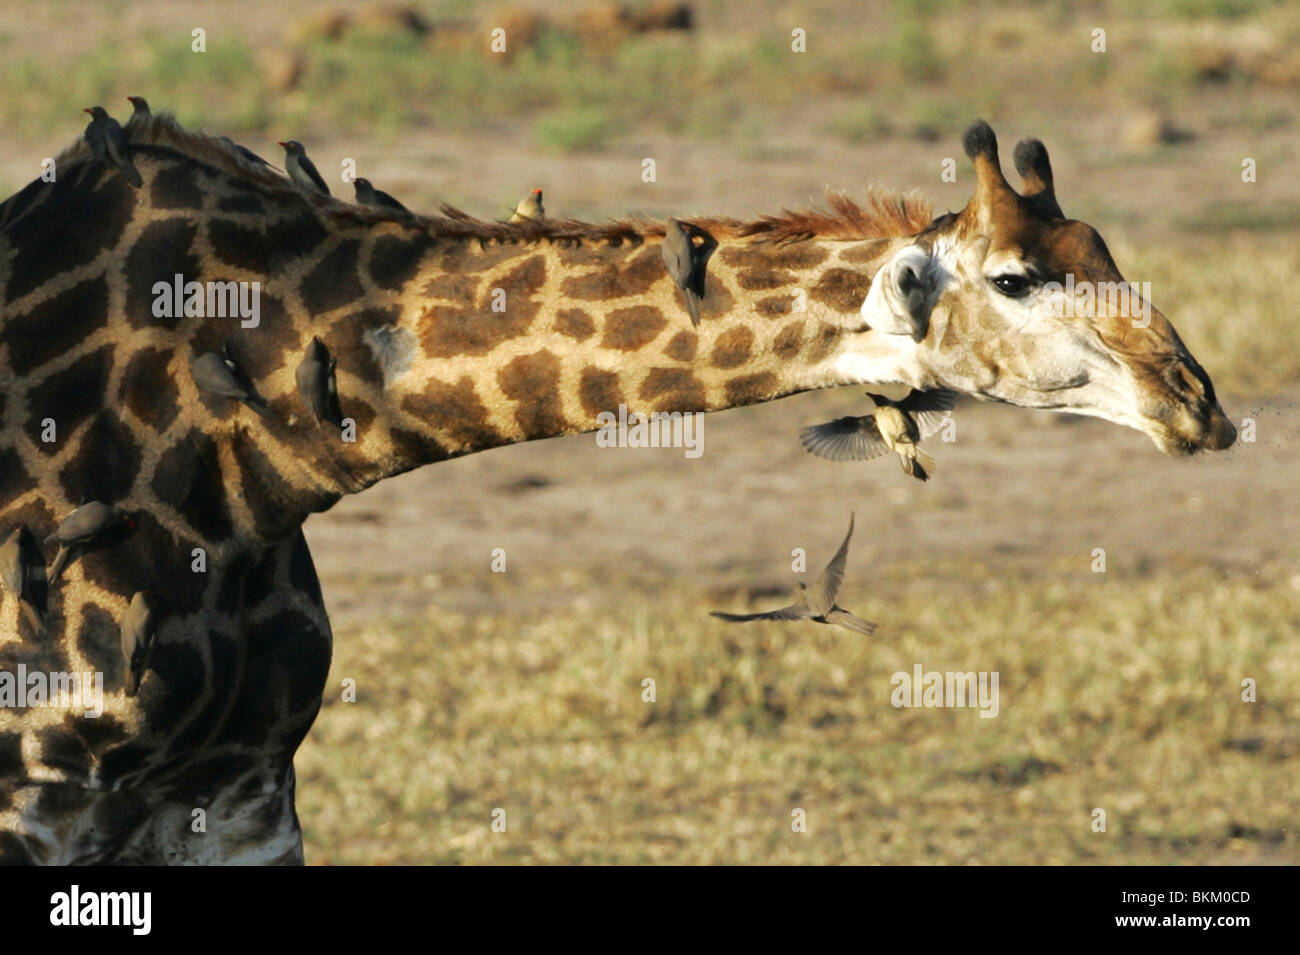 Southern Giraffe with oxpeckers, Kruger Park, South Africa Stock Photo